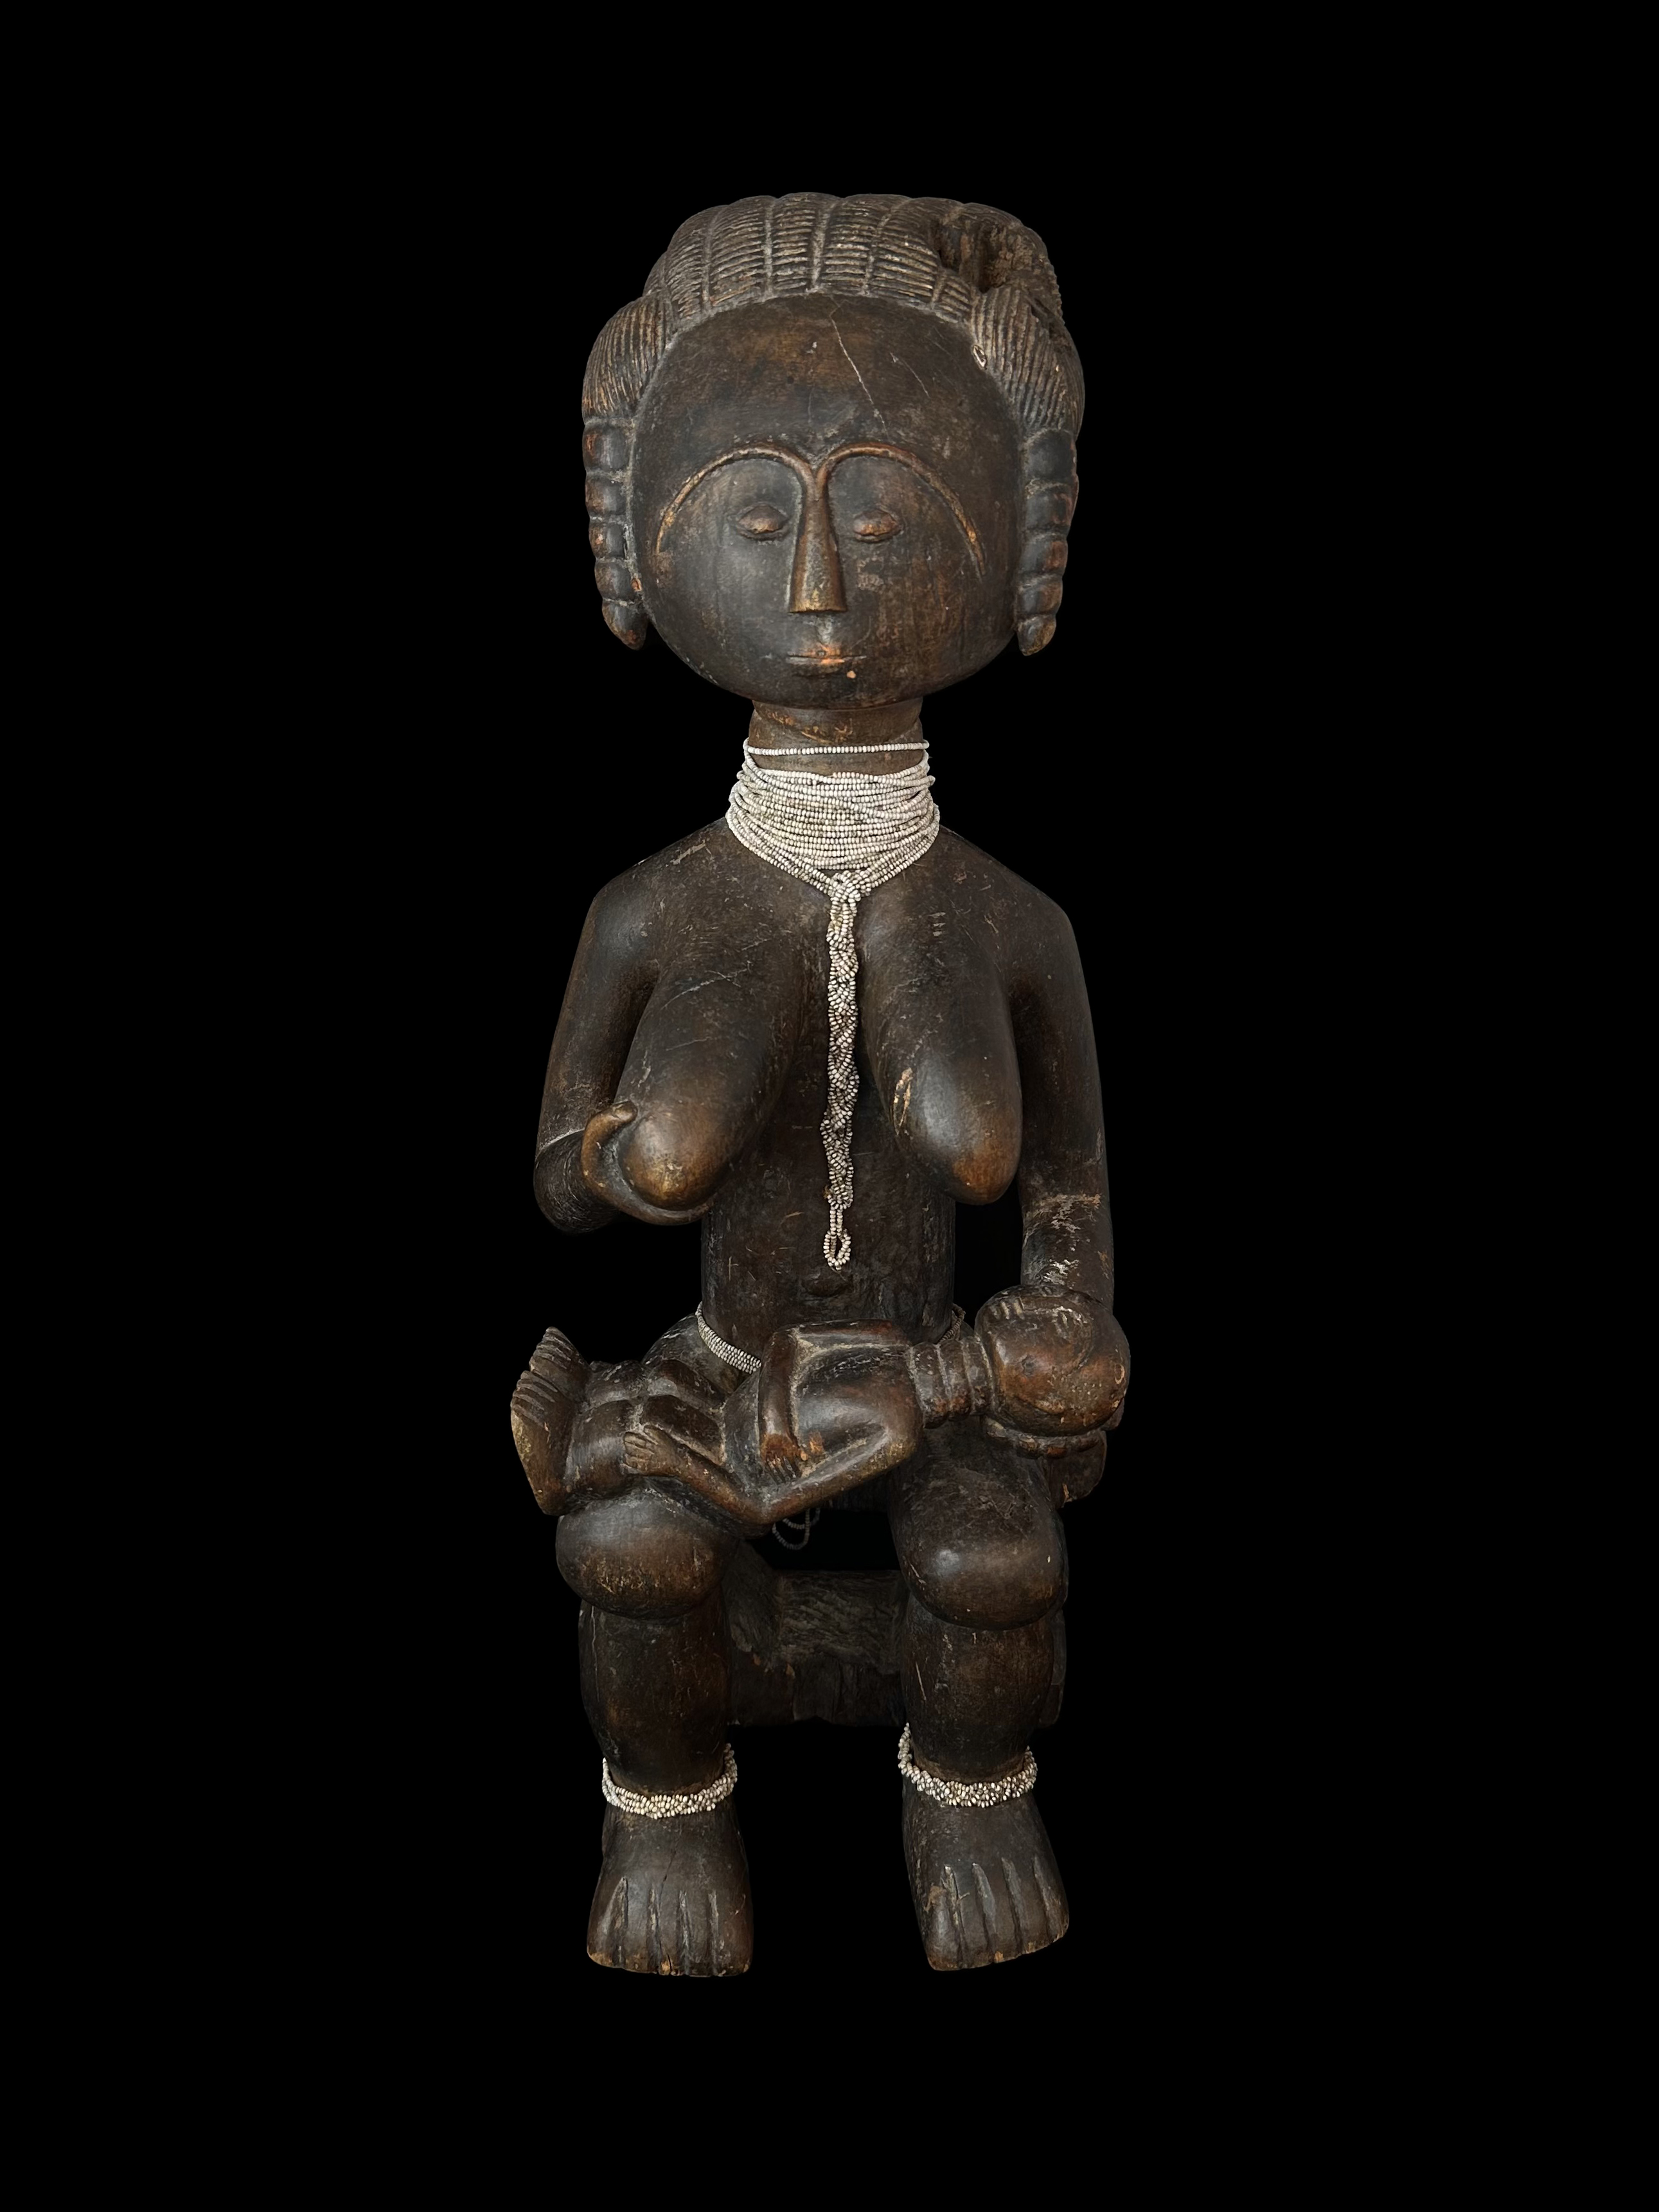 Shrine Maternity Statue CGM45- Akan People (Ashanti Group), Ghana (Please call for price and availability)